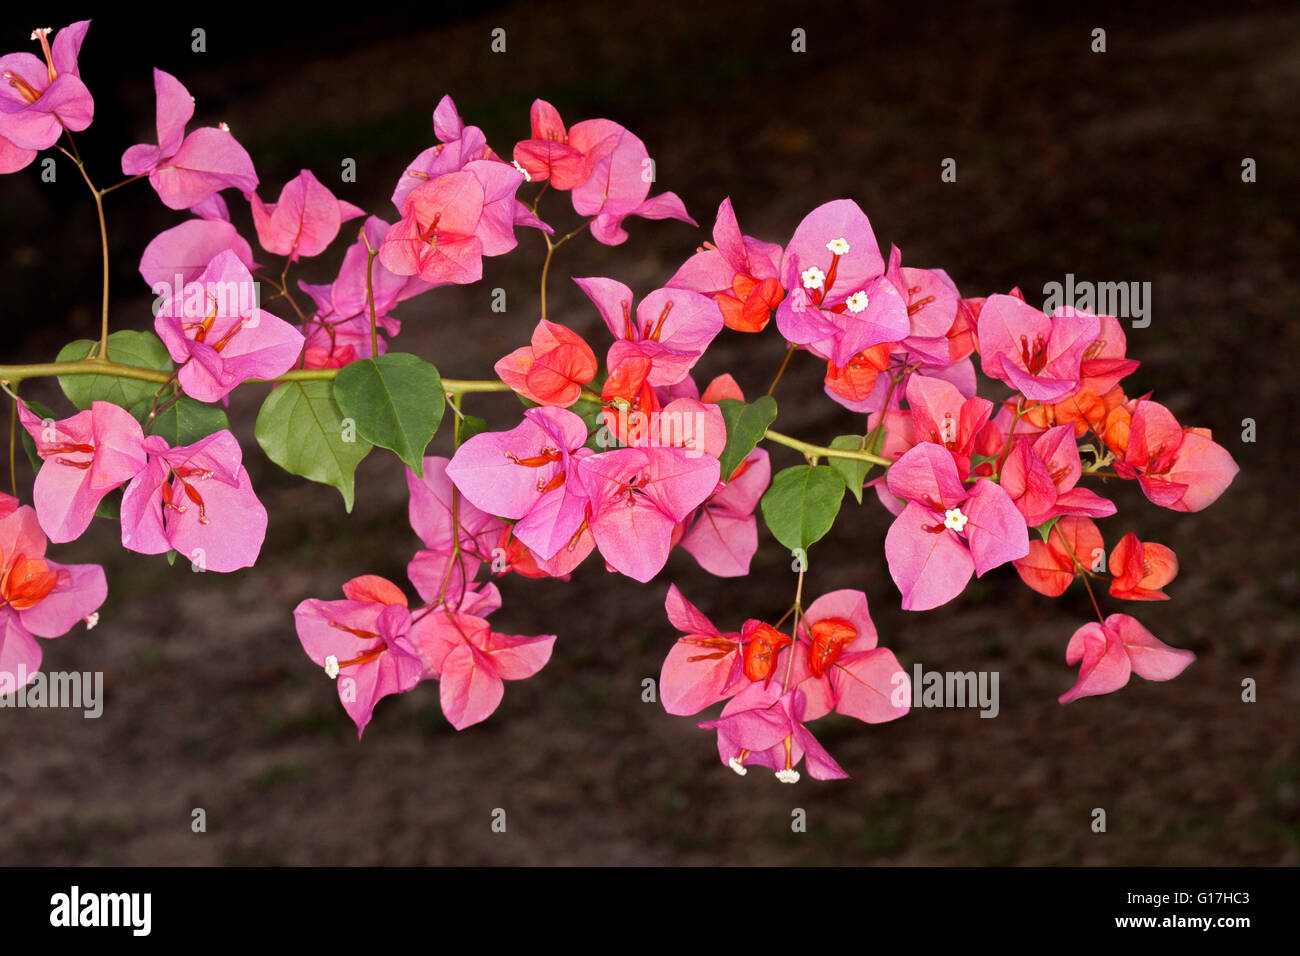 Cluster of vivid pink flowers and leaves of bougainvillea bambino dwarf variety 'Bokay' against dark background Stock Photo